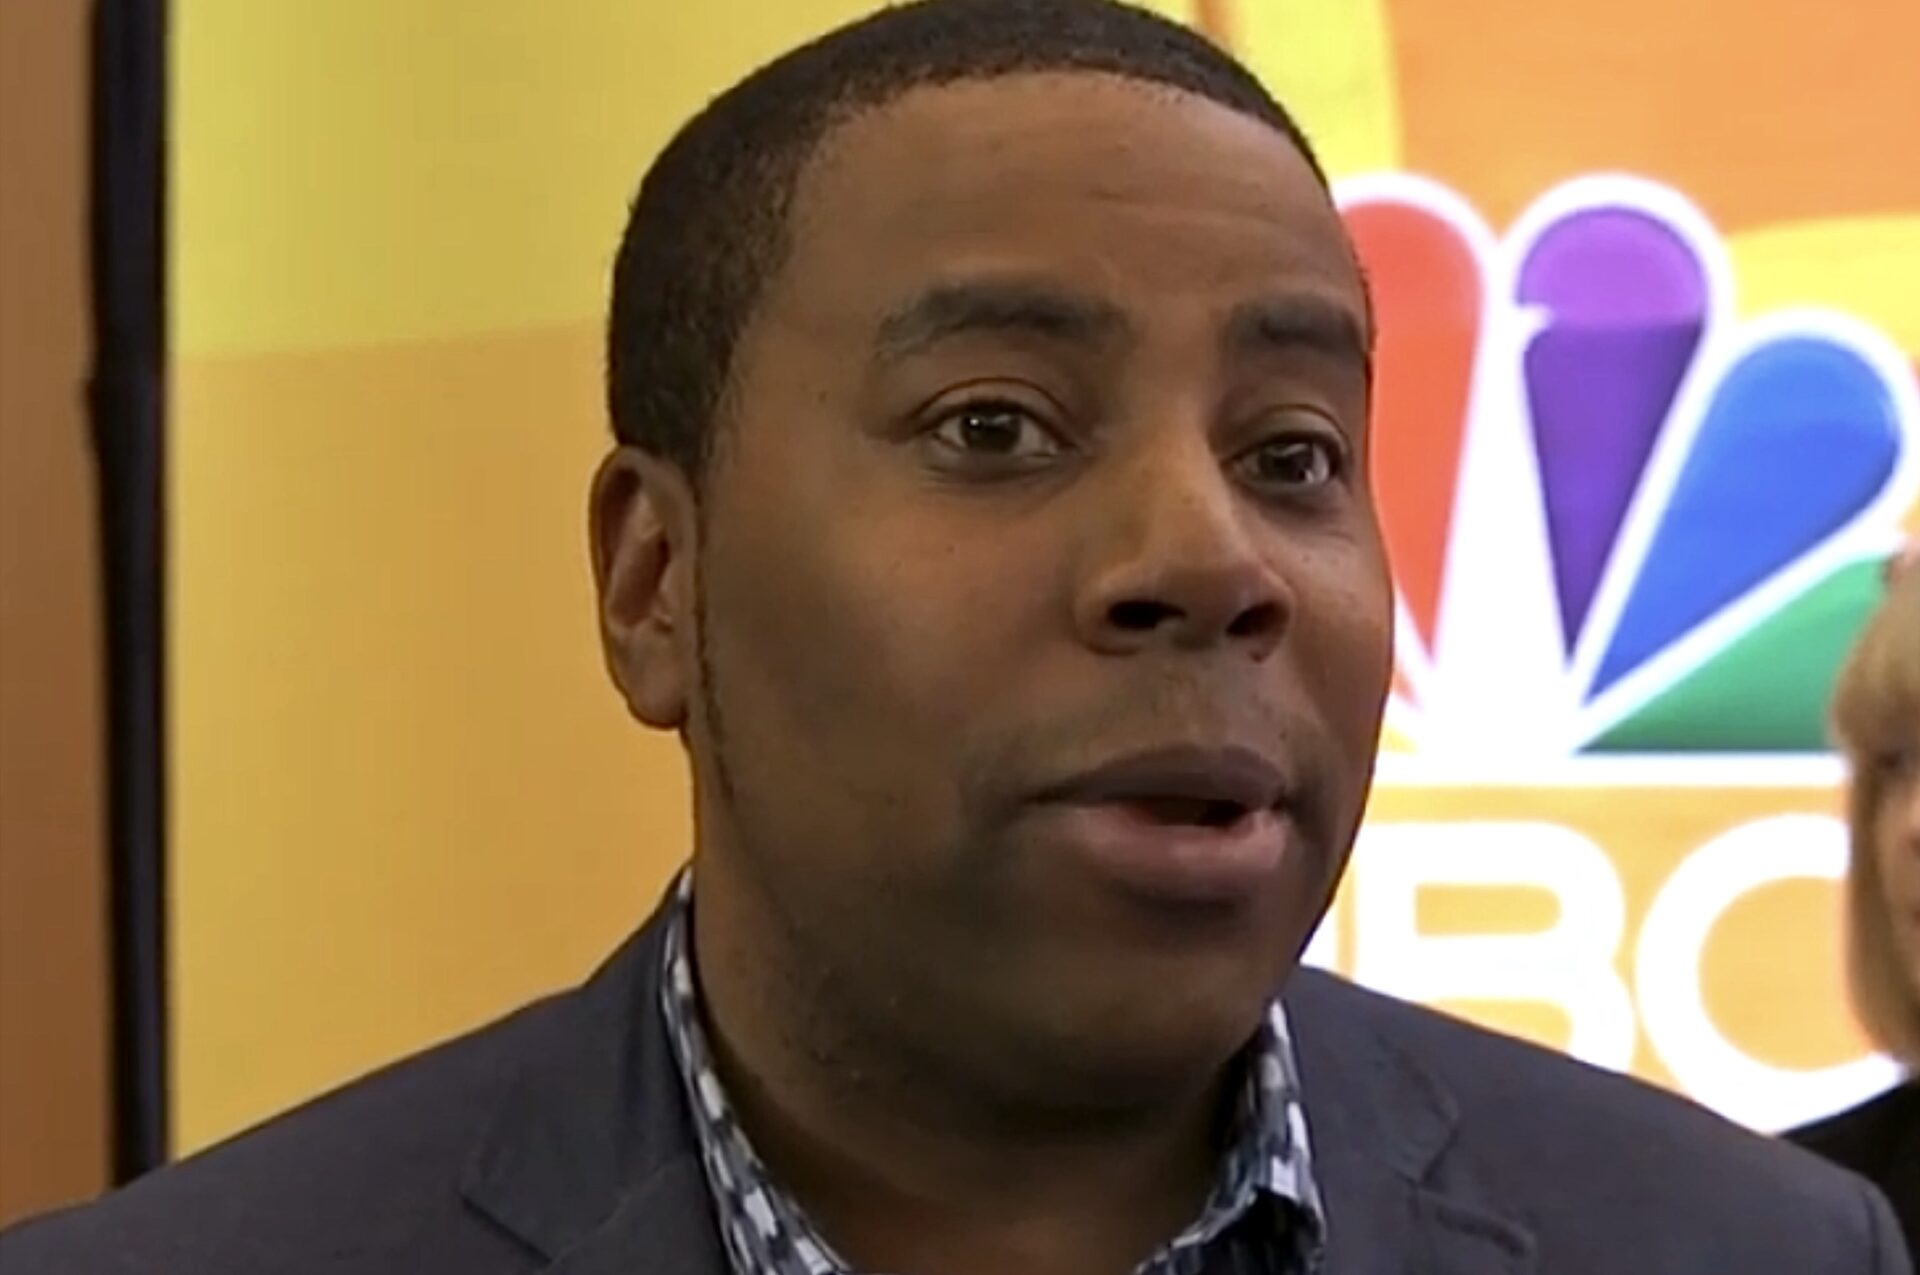 Kenan Thompson’s Old Accountant Stole $1.5M From Him During His Nickelodeon Days